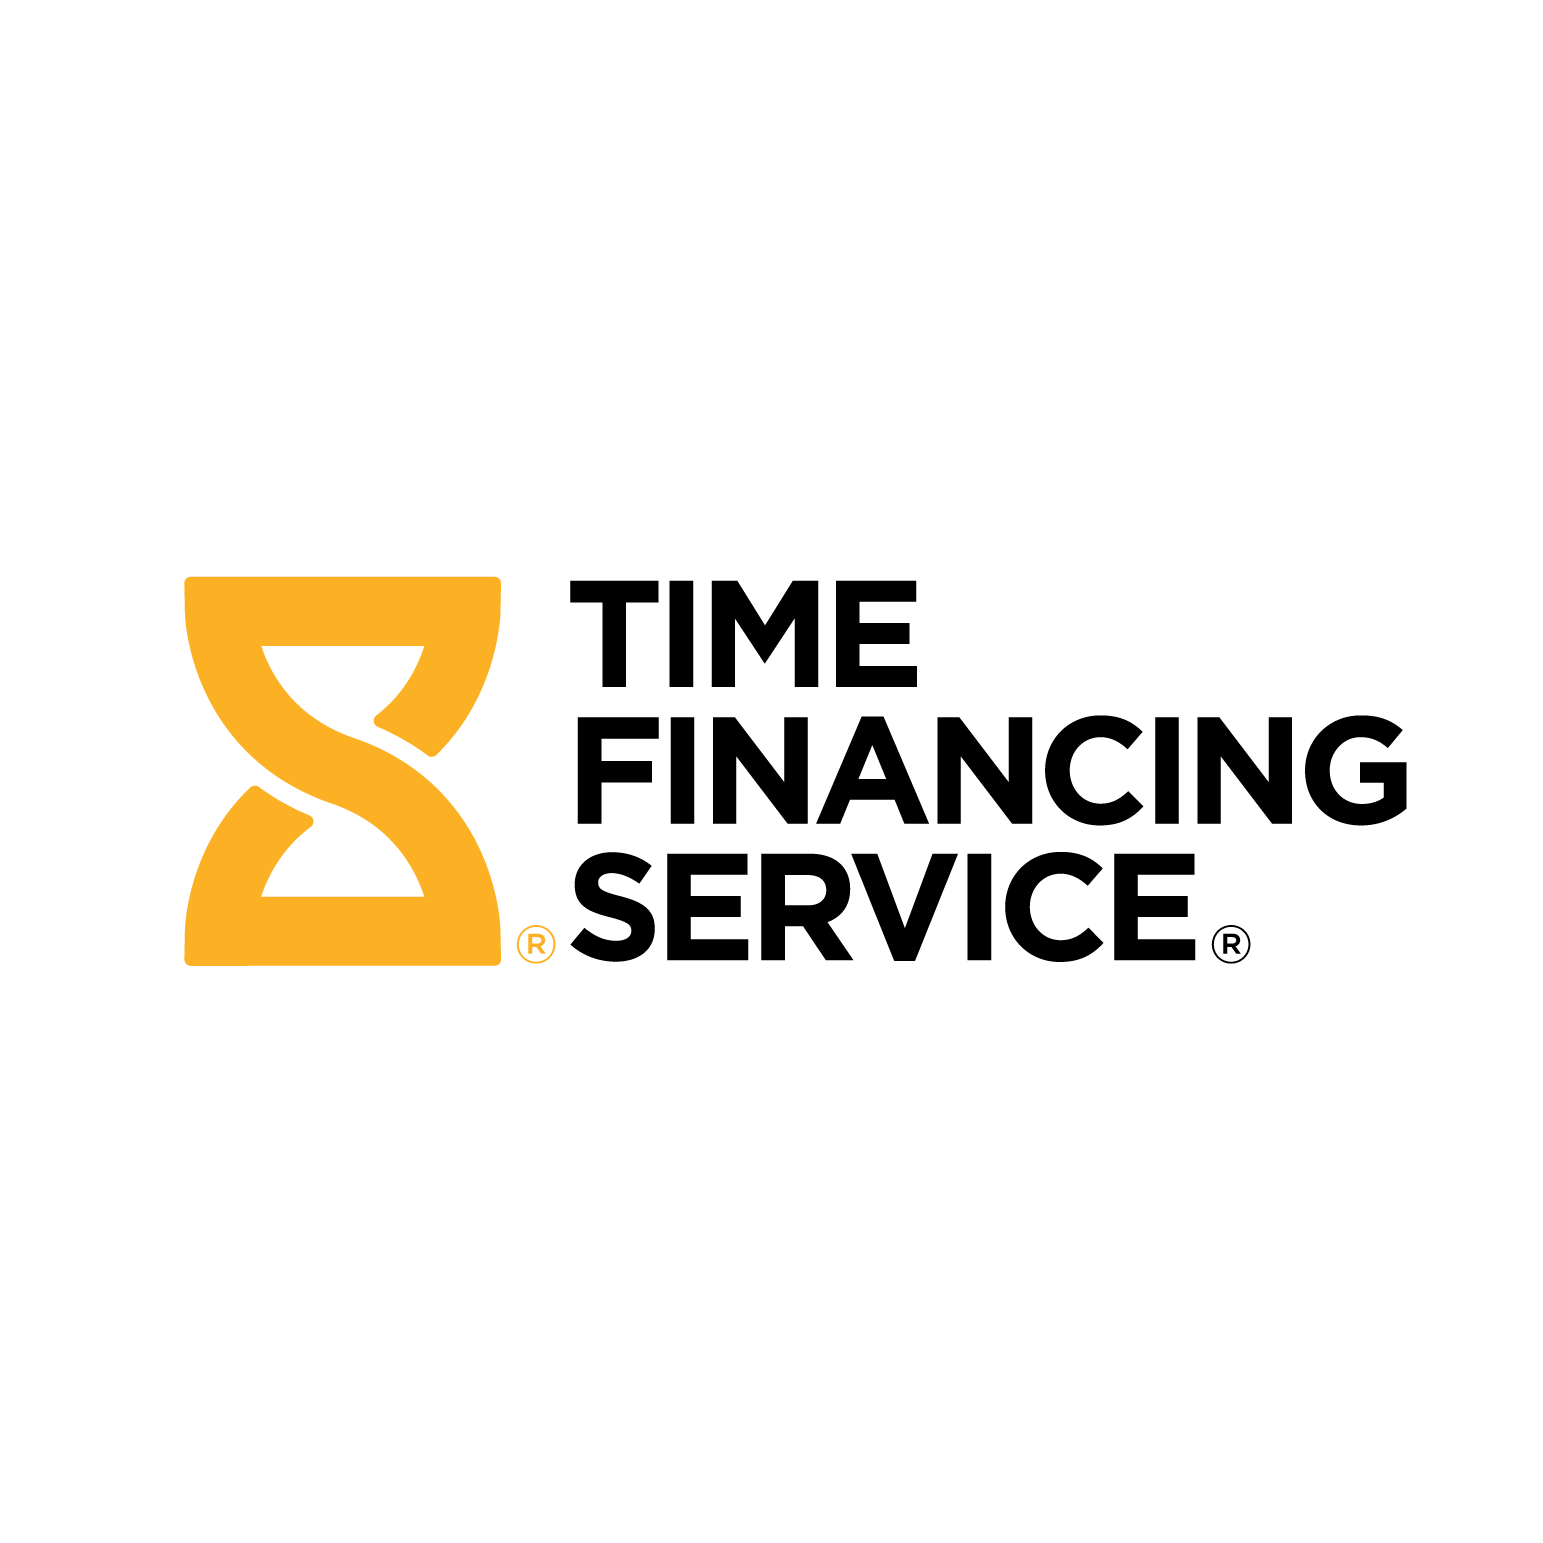 Time Financing Service - Greenville, NC 27834 - (252)355-1776 | ShowMeLocal.com